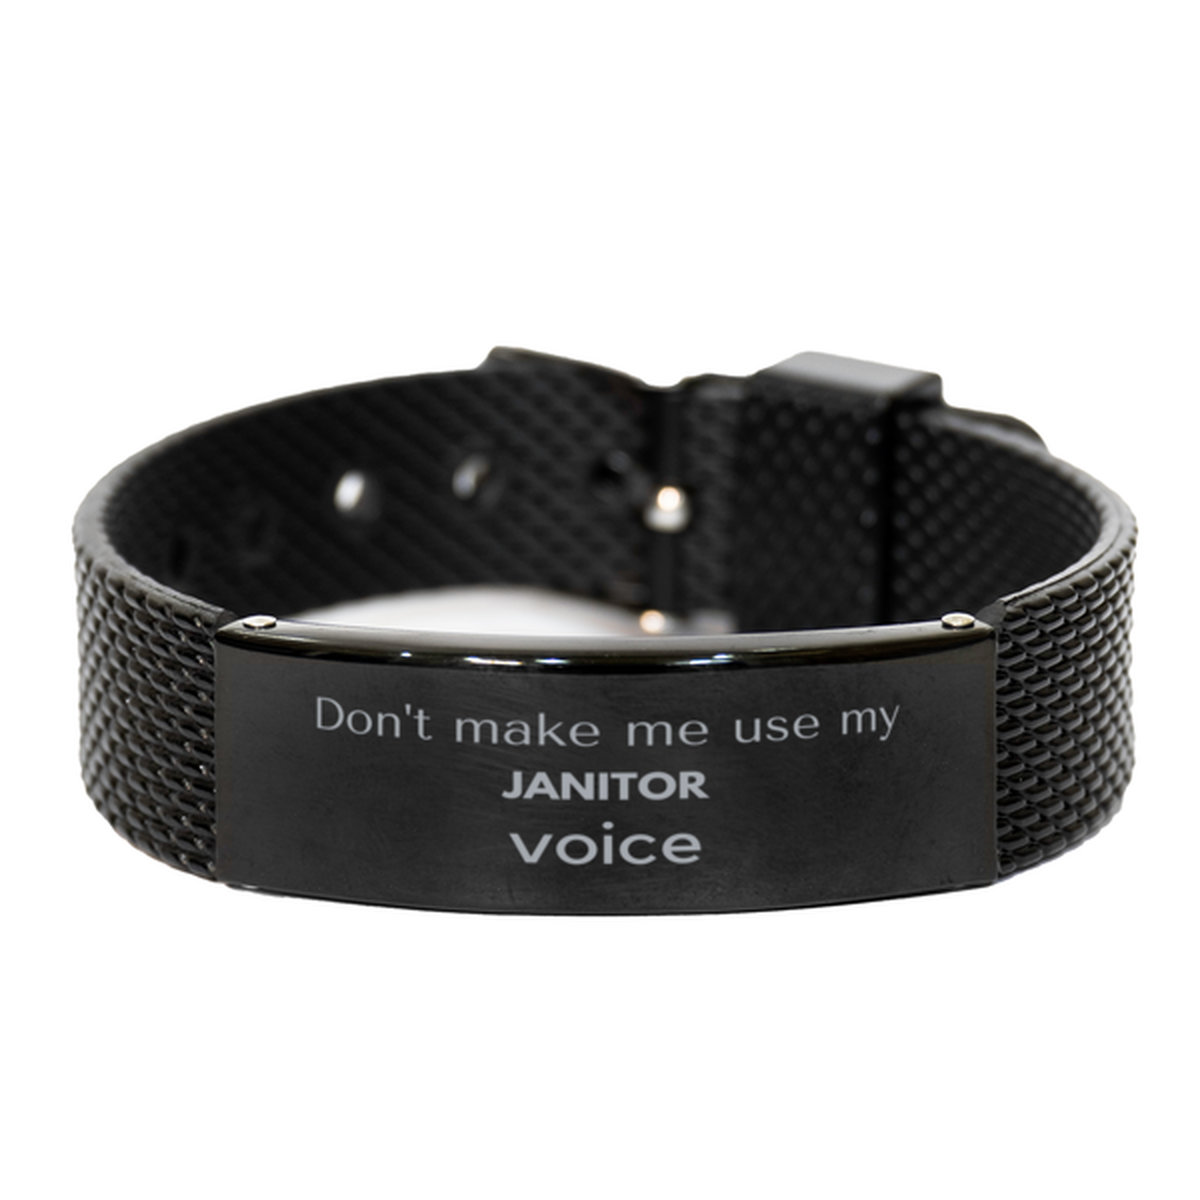 Don't make me use my Janitor voice, Sarcasm Janitor Gifts, Christmas Janitor Black Shark Mesh Bracelet Birthday Unique Gifts For Janitor Coworkers, Men, Women, Colleague, Friends